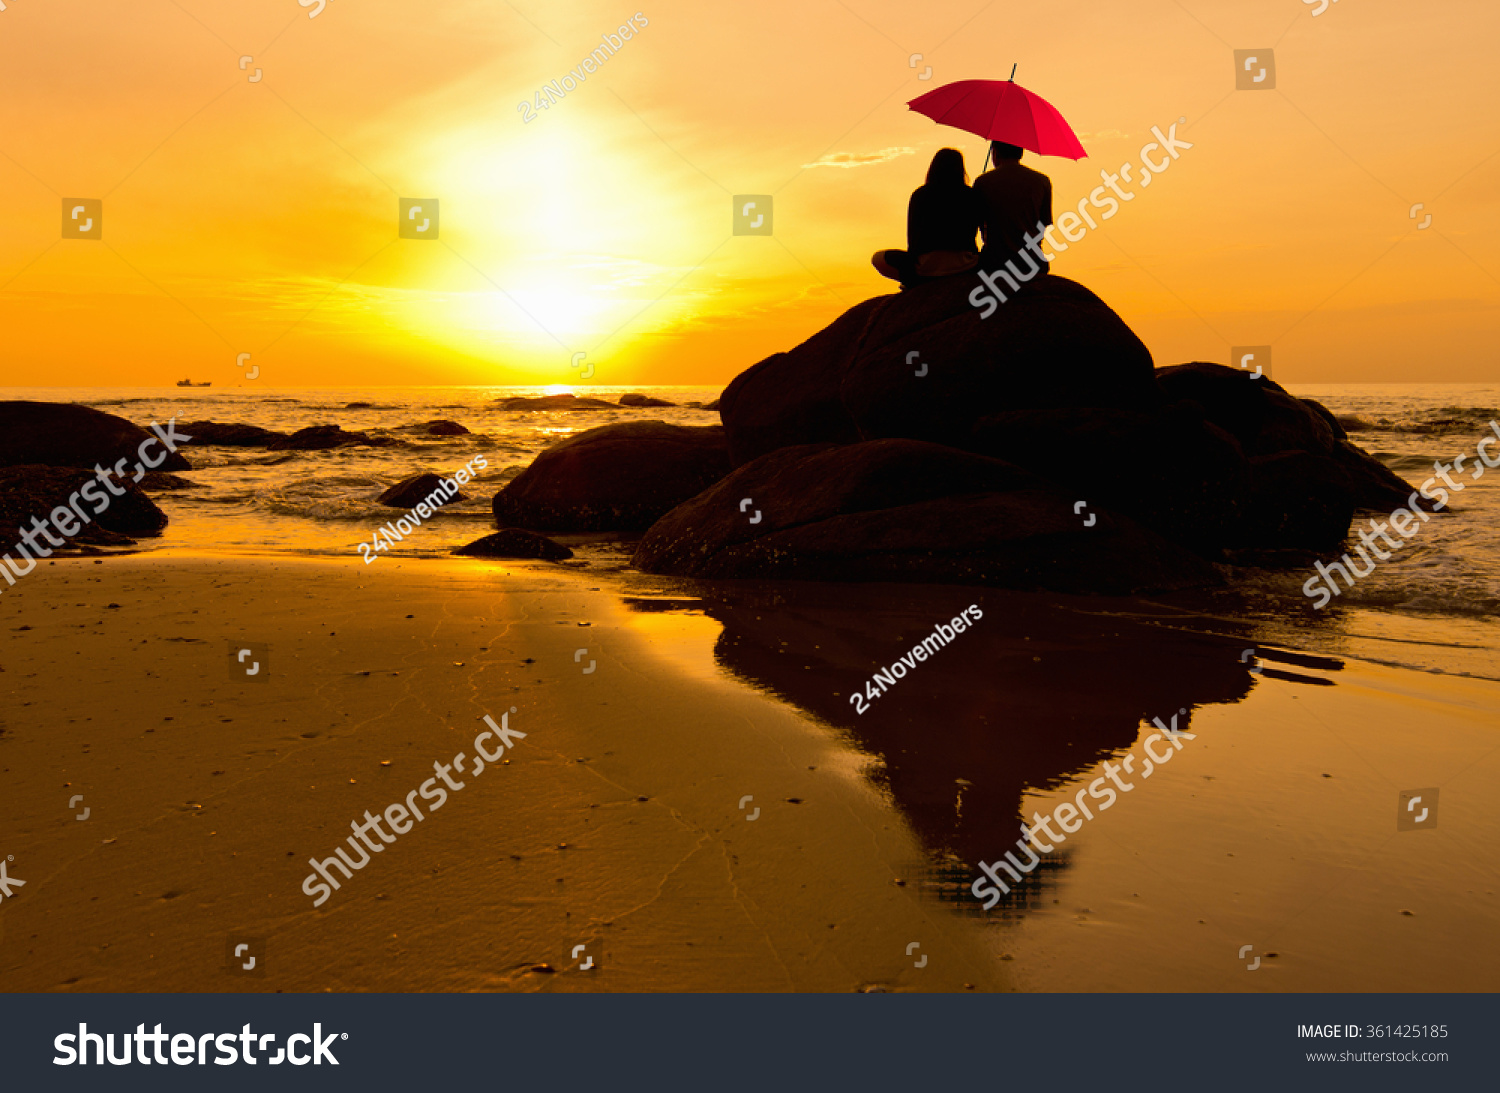 Silhouettes Couple Against Sunset Sky Romantic Stock Photo Shutterstock